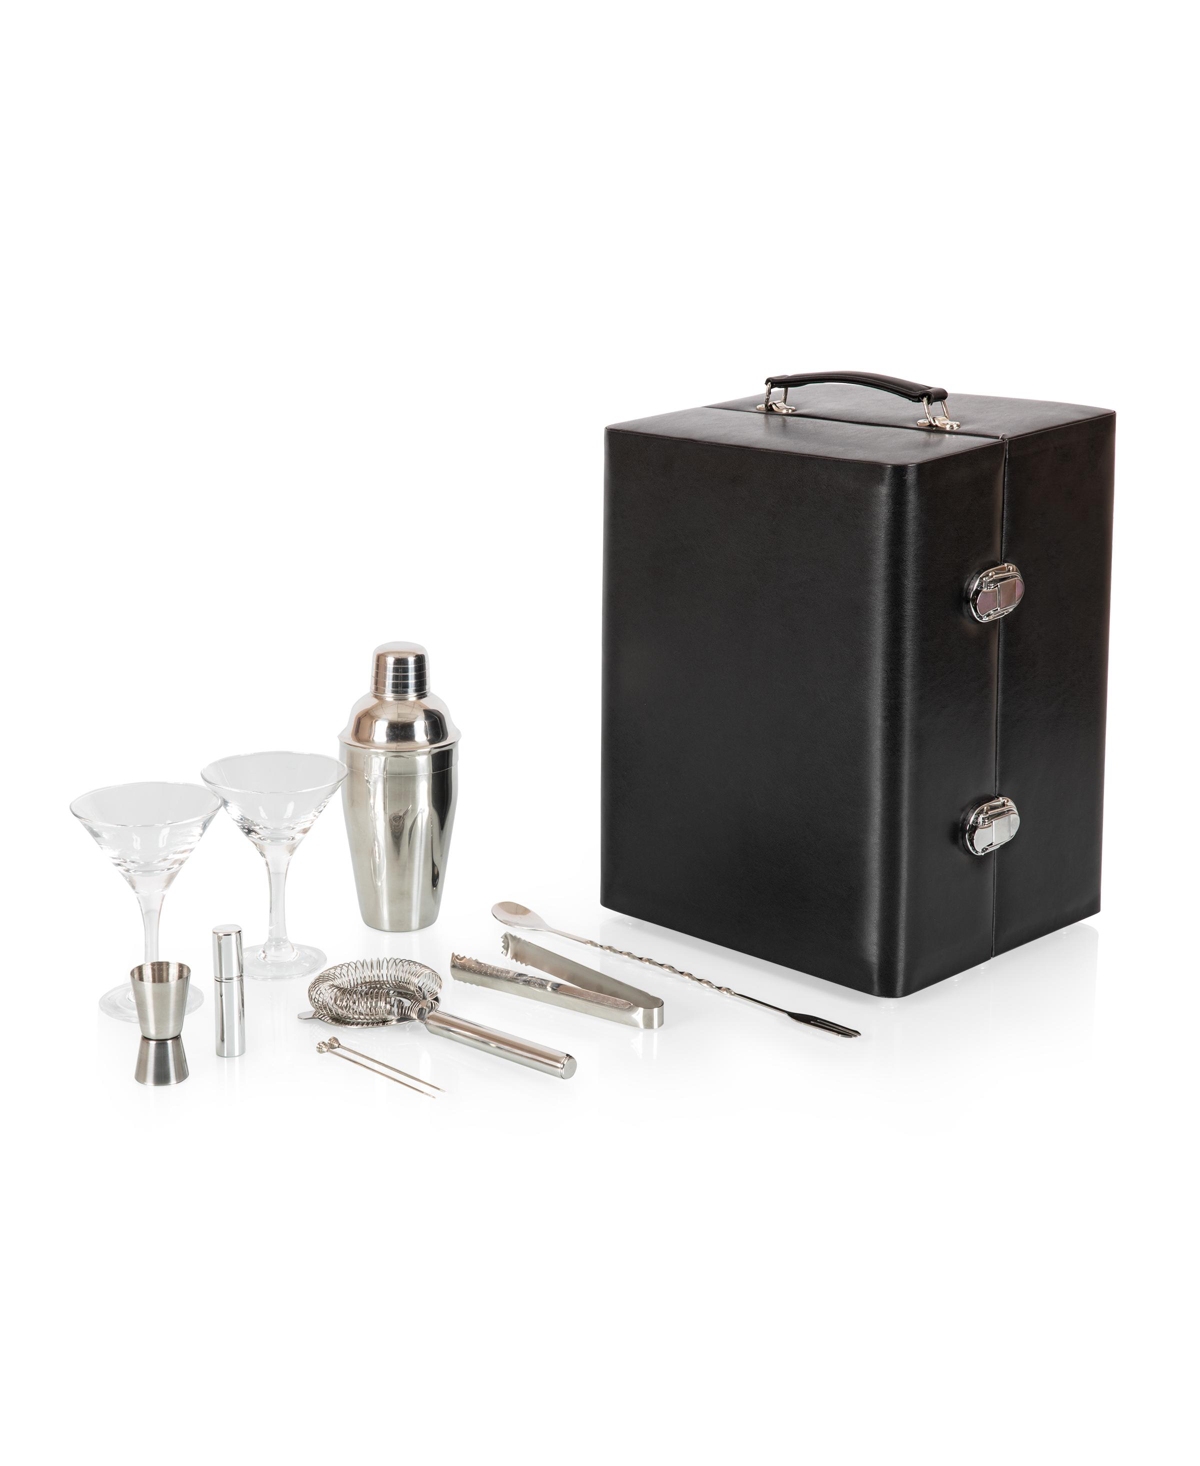 Legacy by Picnic Time Manhattan Cocktail Case and Bar Set - Black